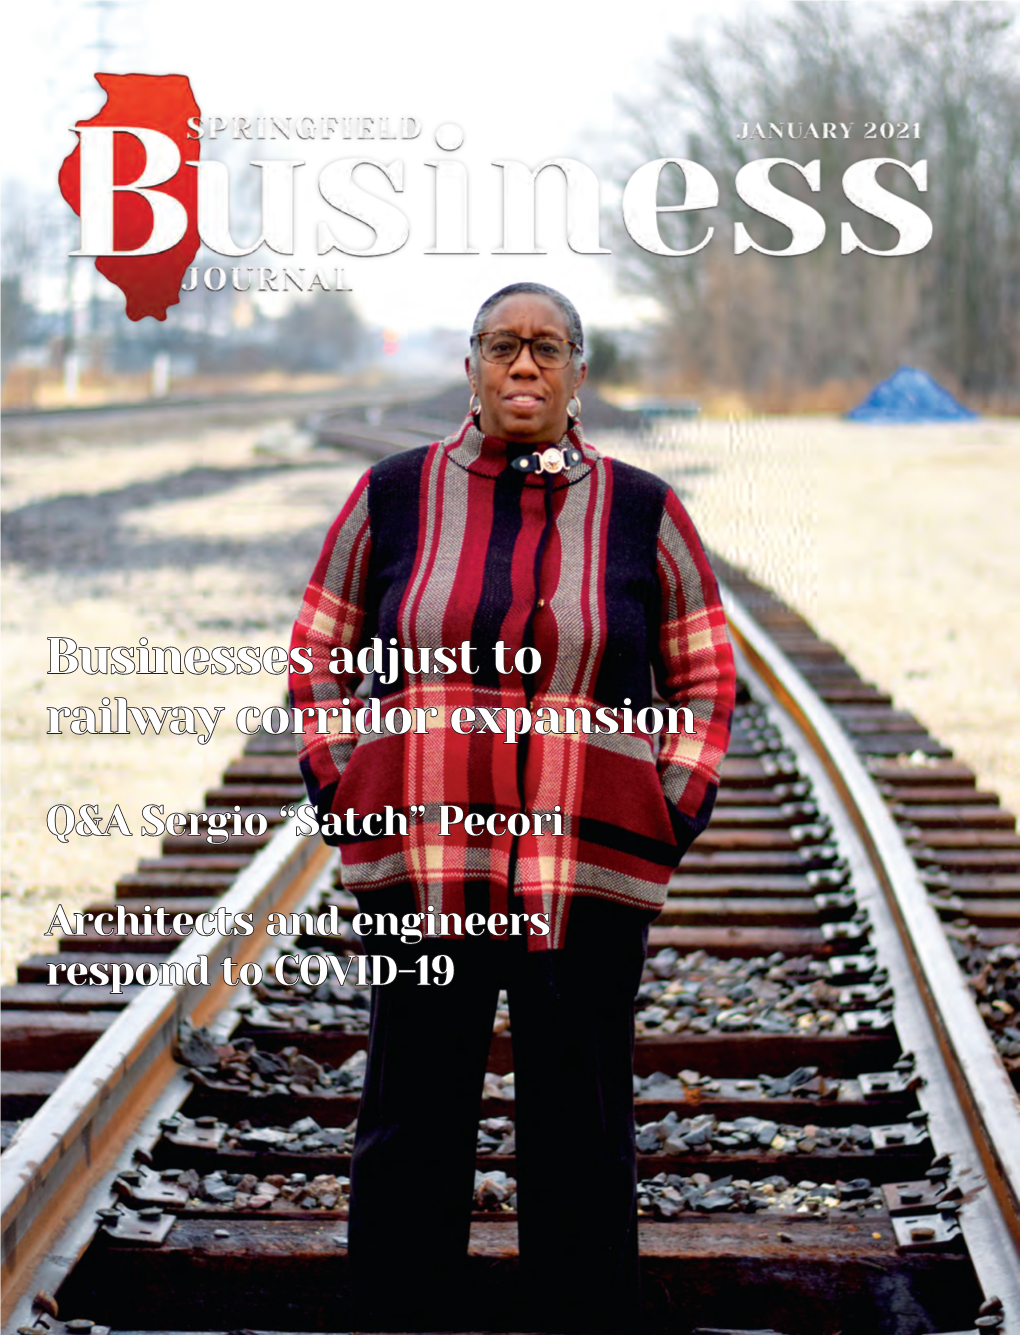 January 2021 • Page 1 Page 2 • January 2021 • Springfi Eld Business Journal Springfi Eld Business Journal • January 2021 • Page 3 in This Issue: SBJ Articles